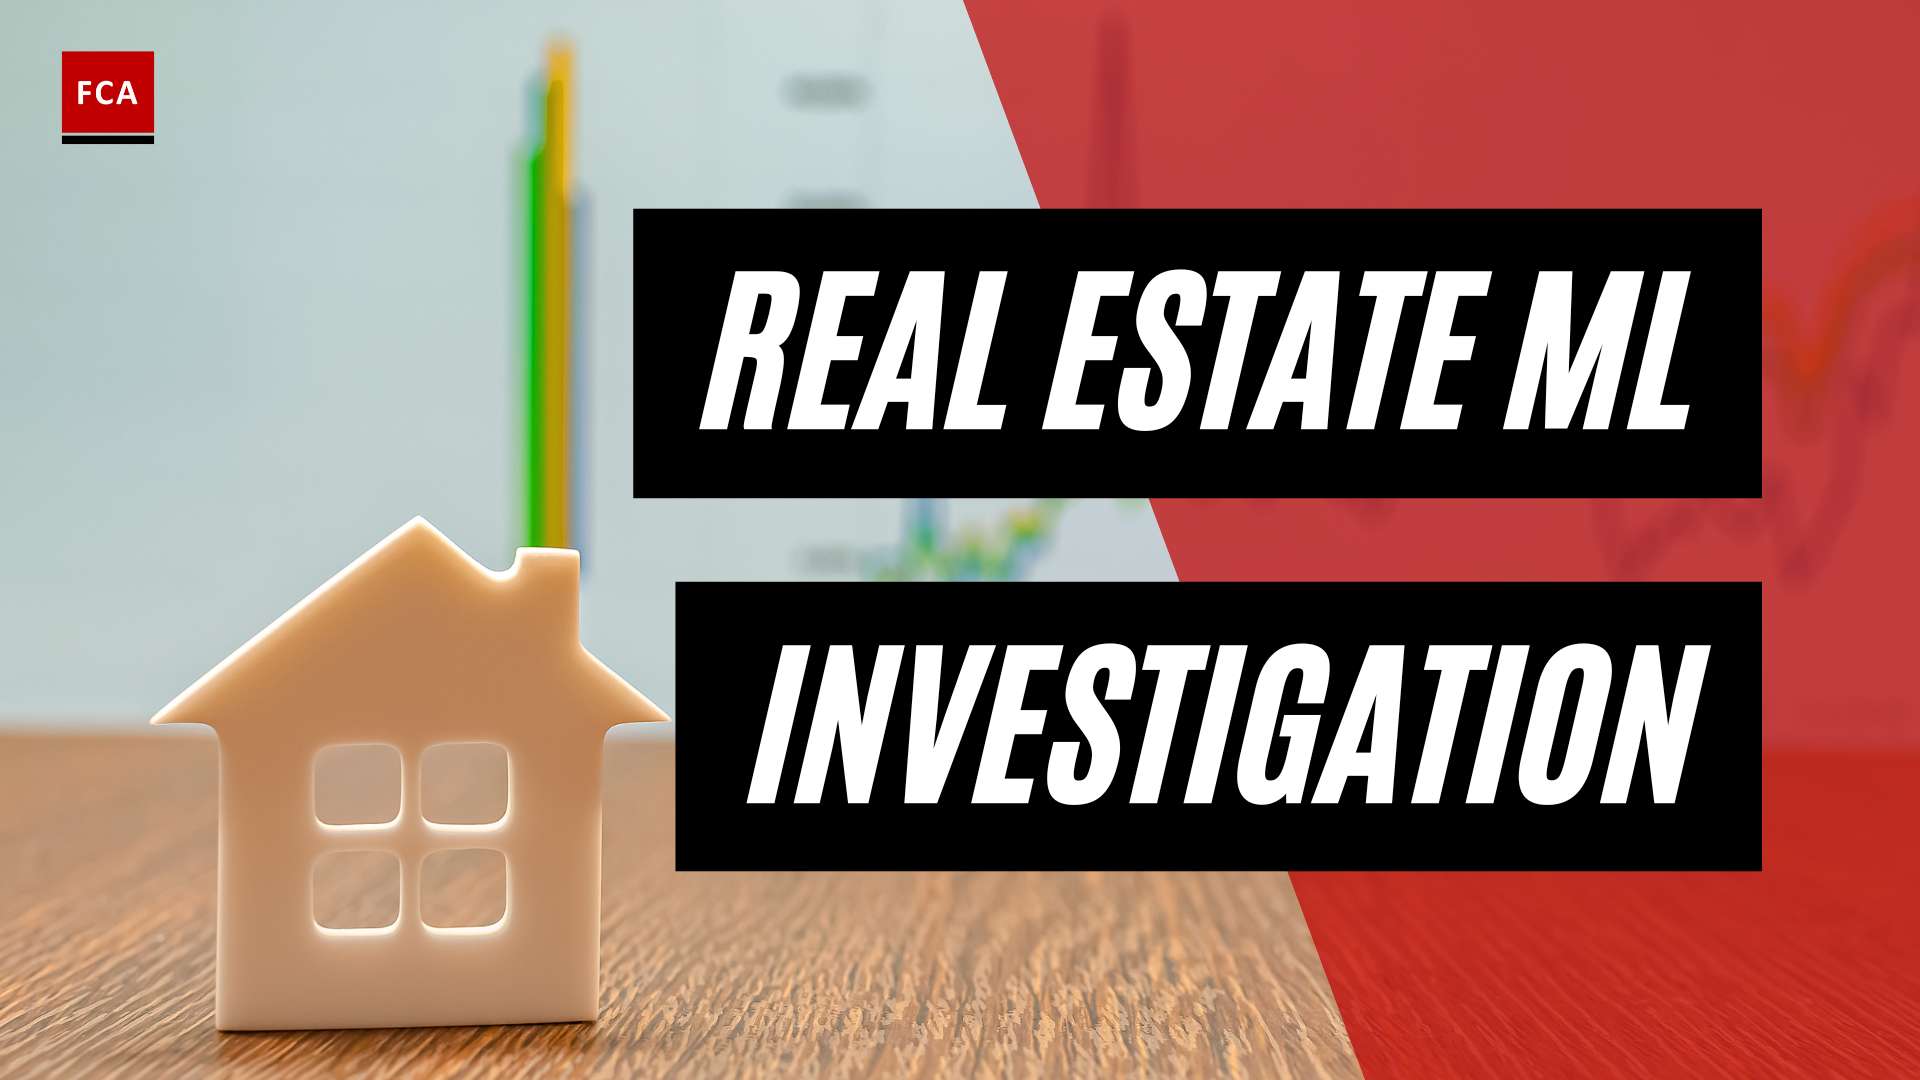 Unmasking The Shadows: Real Estate Money Laundering Investigations